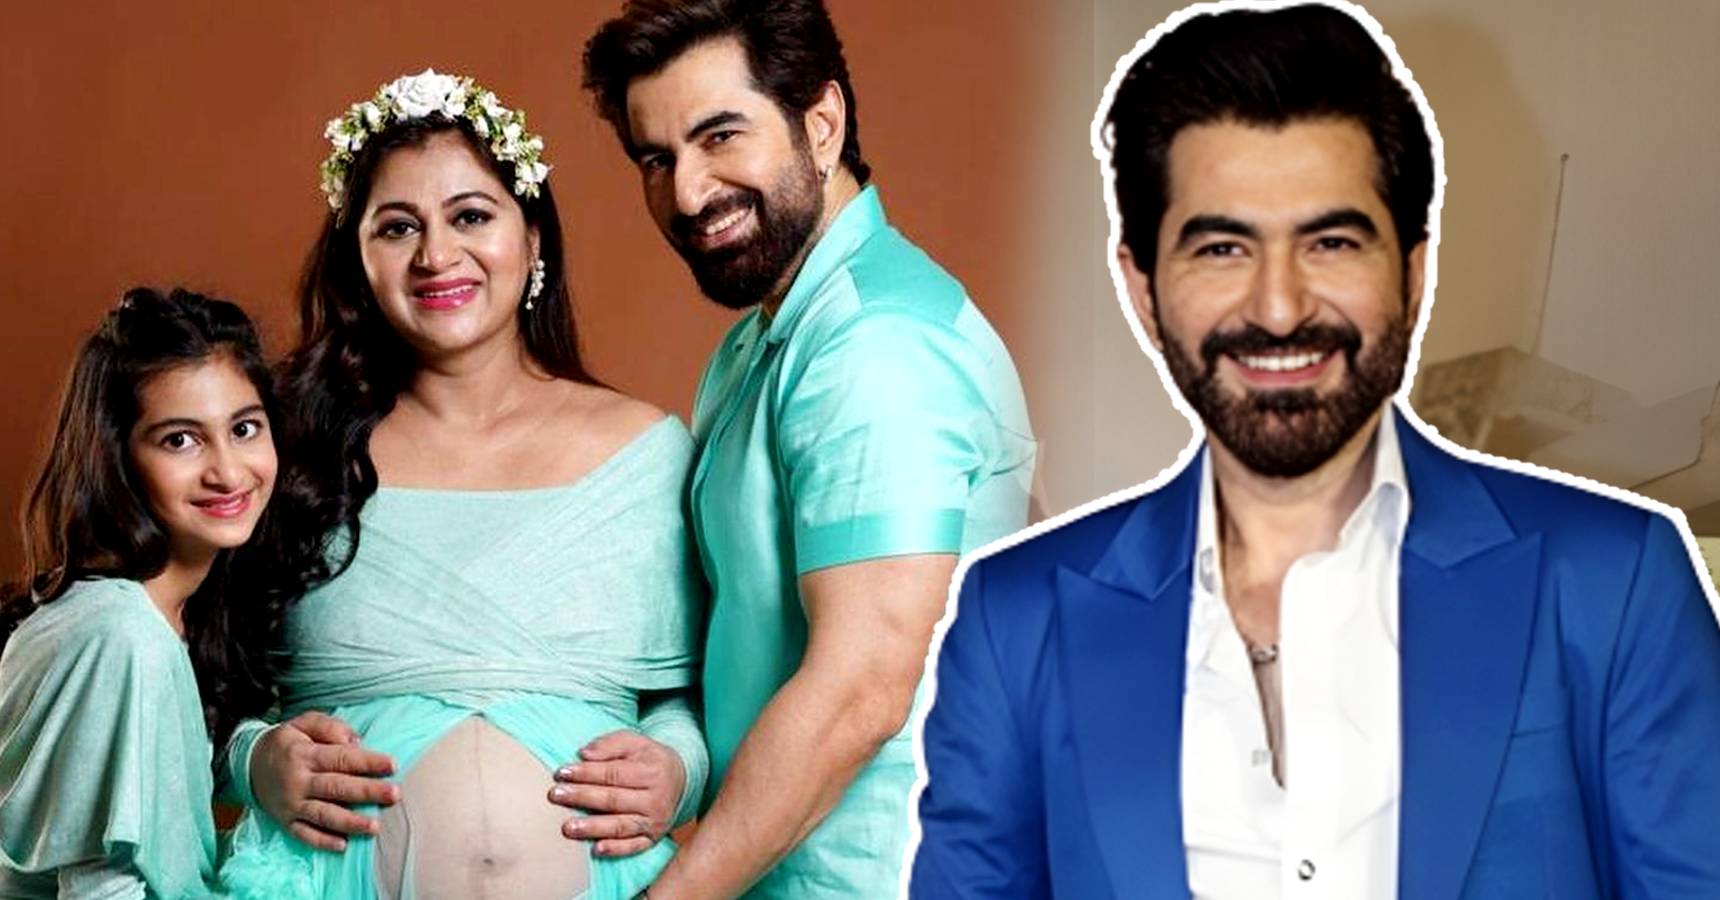 Tollywood actor Jeet is expecting his second child soon shares wife’s pregnancy news